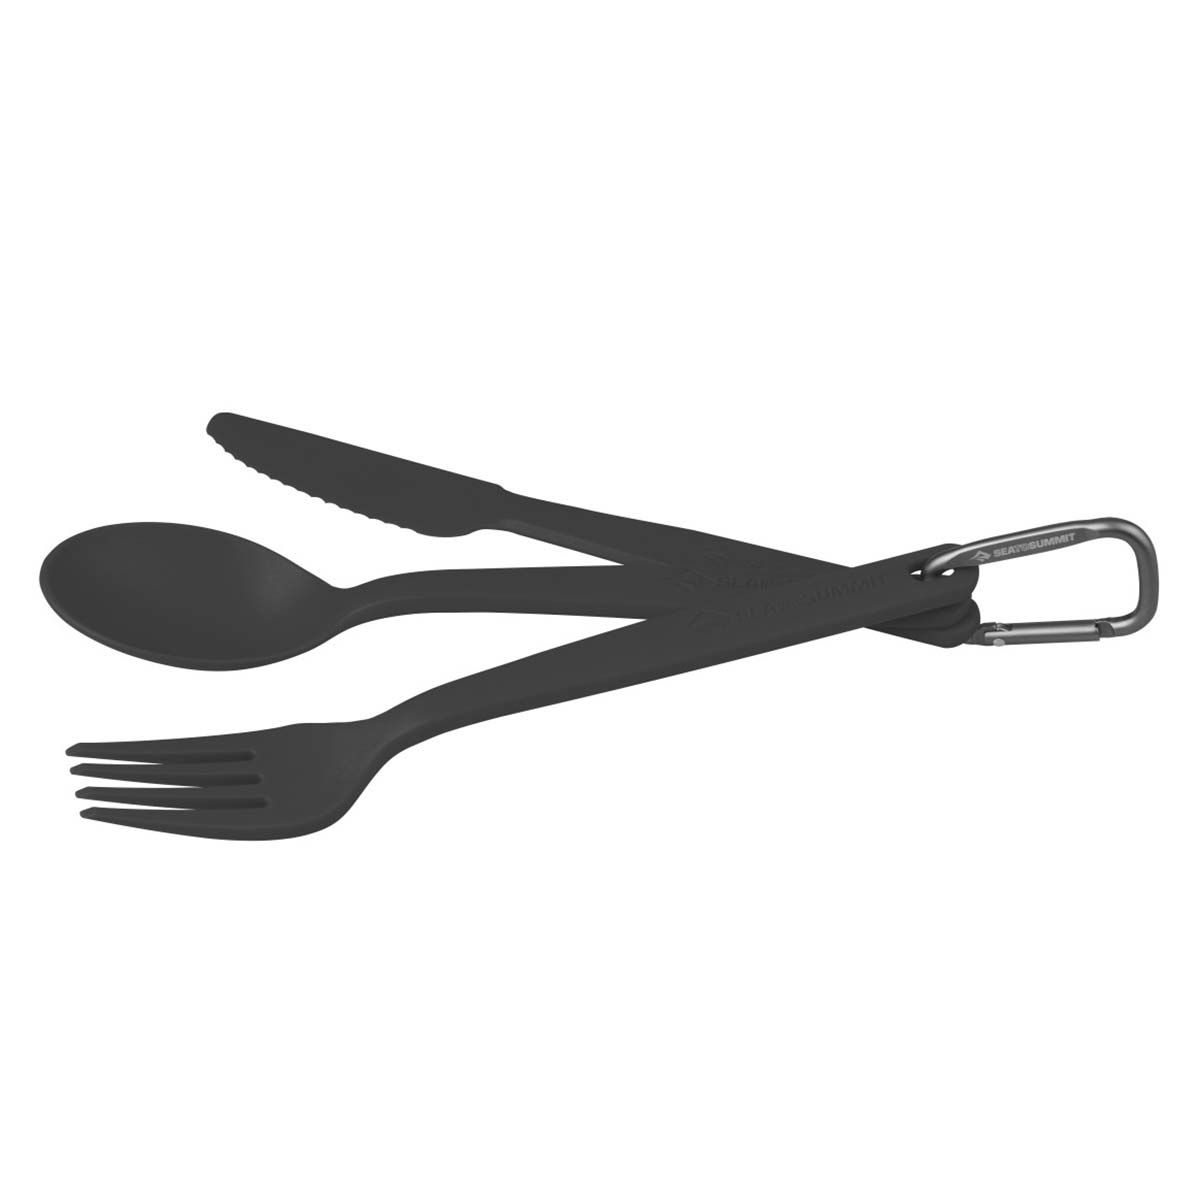 Sea to Summit Camp Cutlery gris